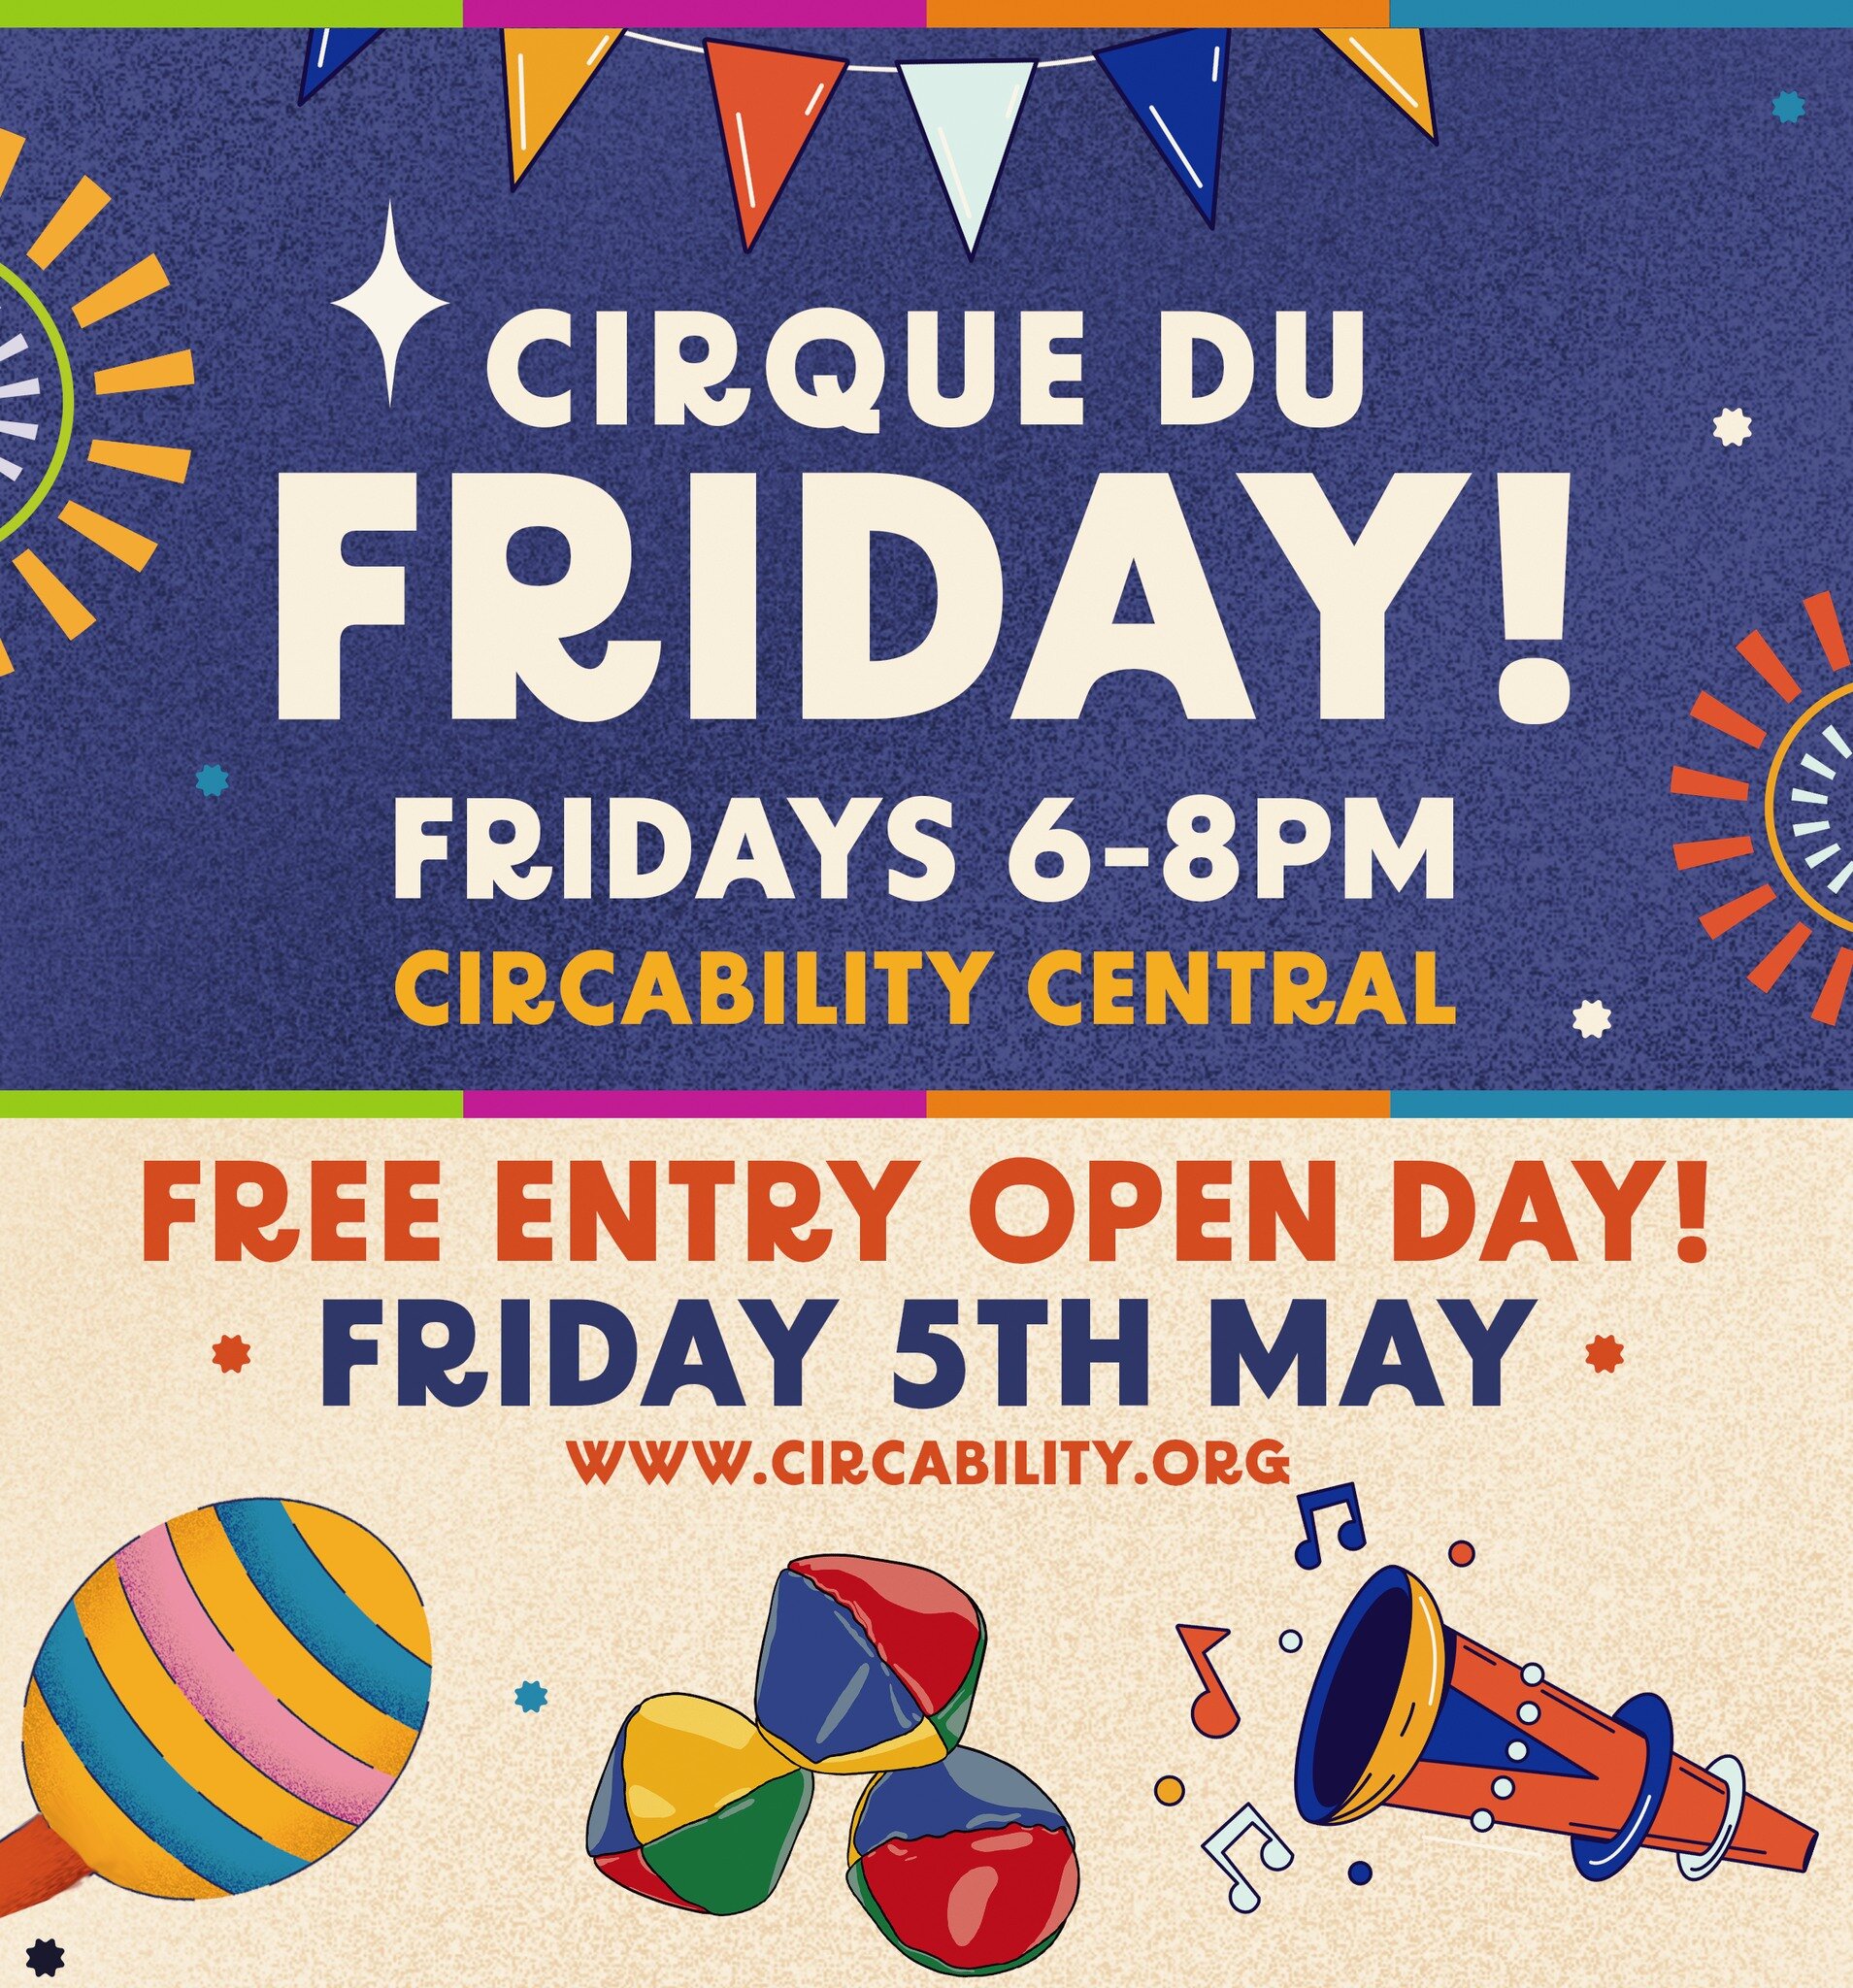 🎉 FREE OPEN DAY! 🎪
📅 May 5th
⏰ 6PM - 8PM
🗺️ Circability Central

Are you ready to experience the thrill of the circus? Then come join us at Cirque du Friday! With a variety of circus skills and tricks to experience, our skilled tutors &amp; high-